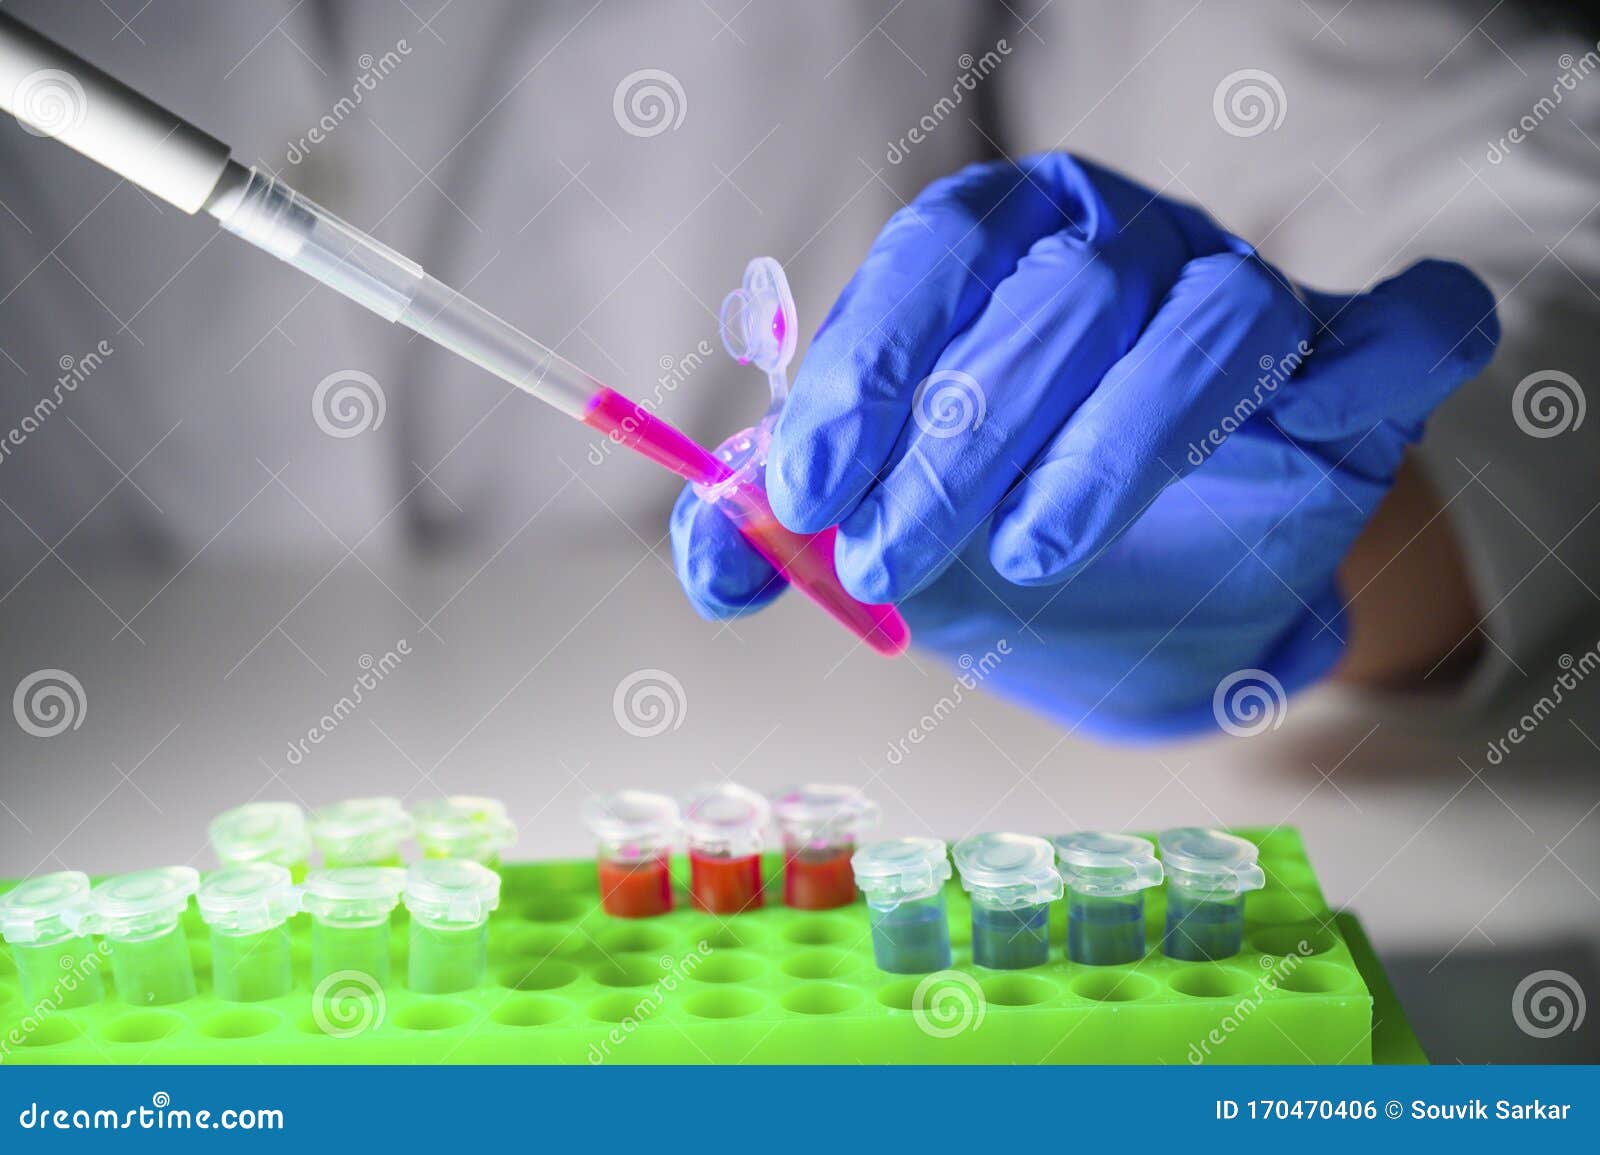 scientist taking out pink chemical solution in eppendorf tube and pipette for biomedical research with tube rack on a white bench